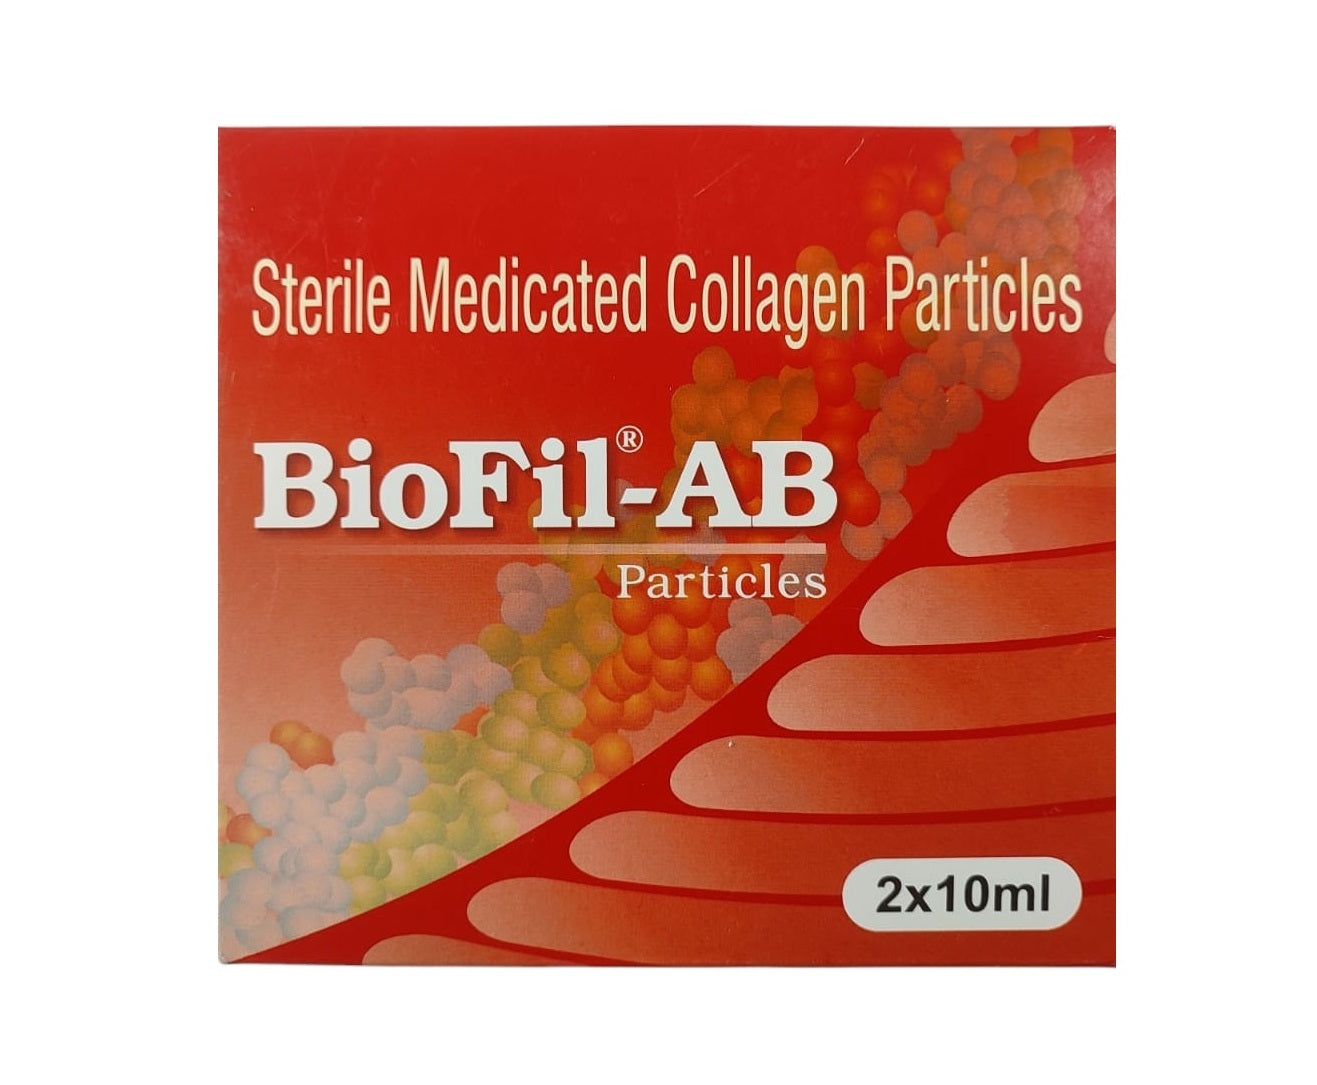 Sterile Medicated Collagen Particles BioFil-AB 2 X 10ml